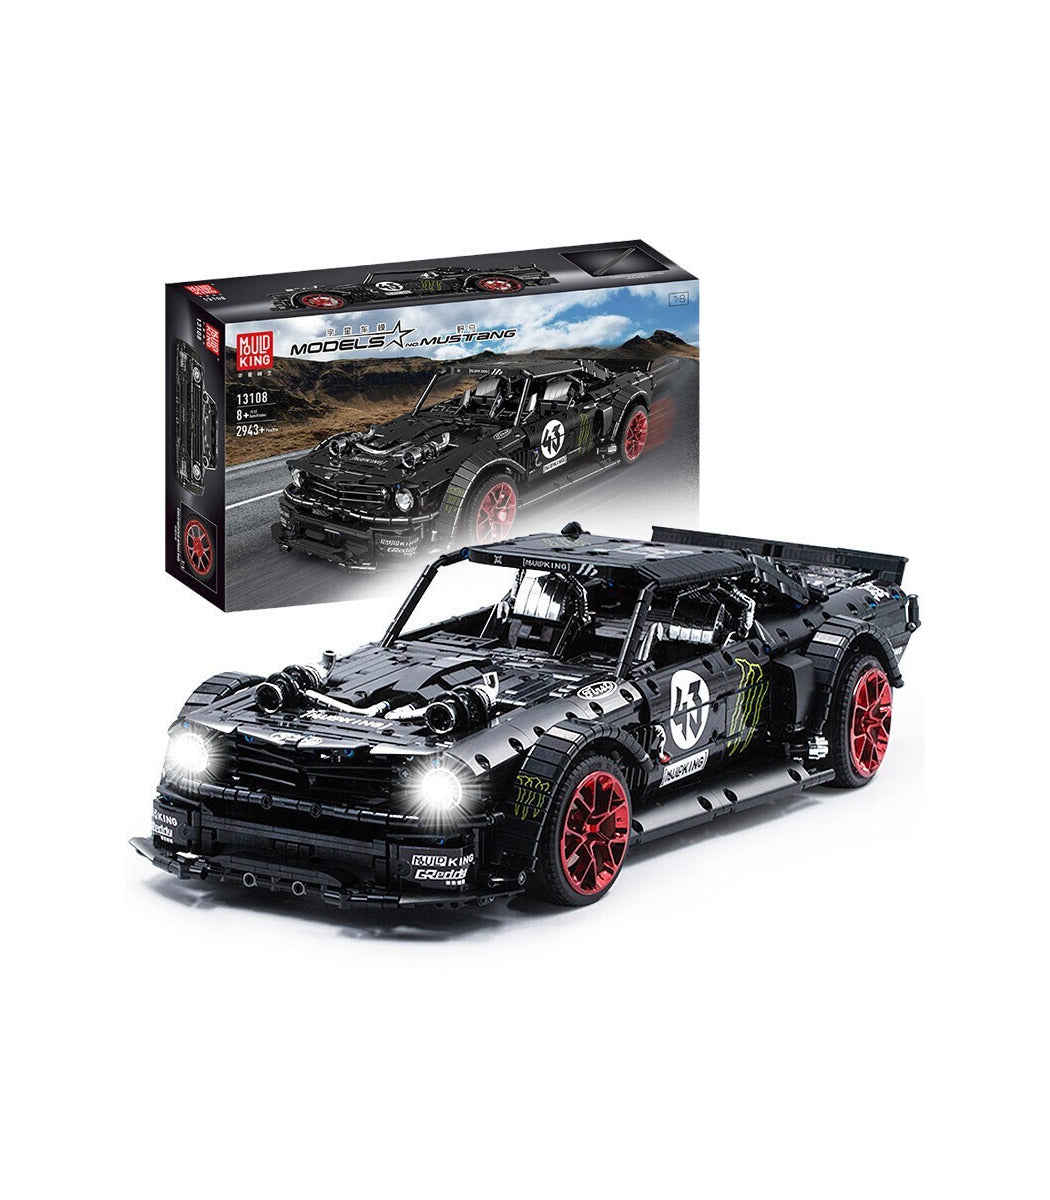 MOULD KING 13108 Ford Mustang Hoonicorn V2 with 2946 Pieces - Command Elite Hobbies